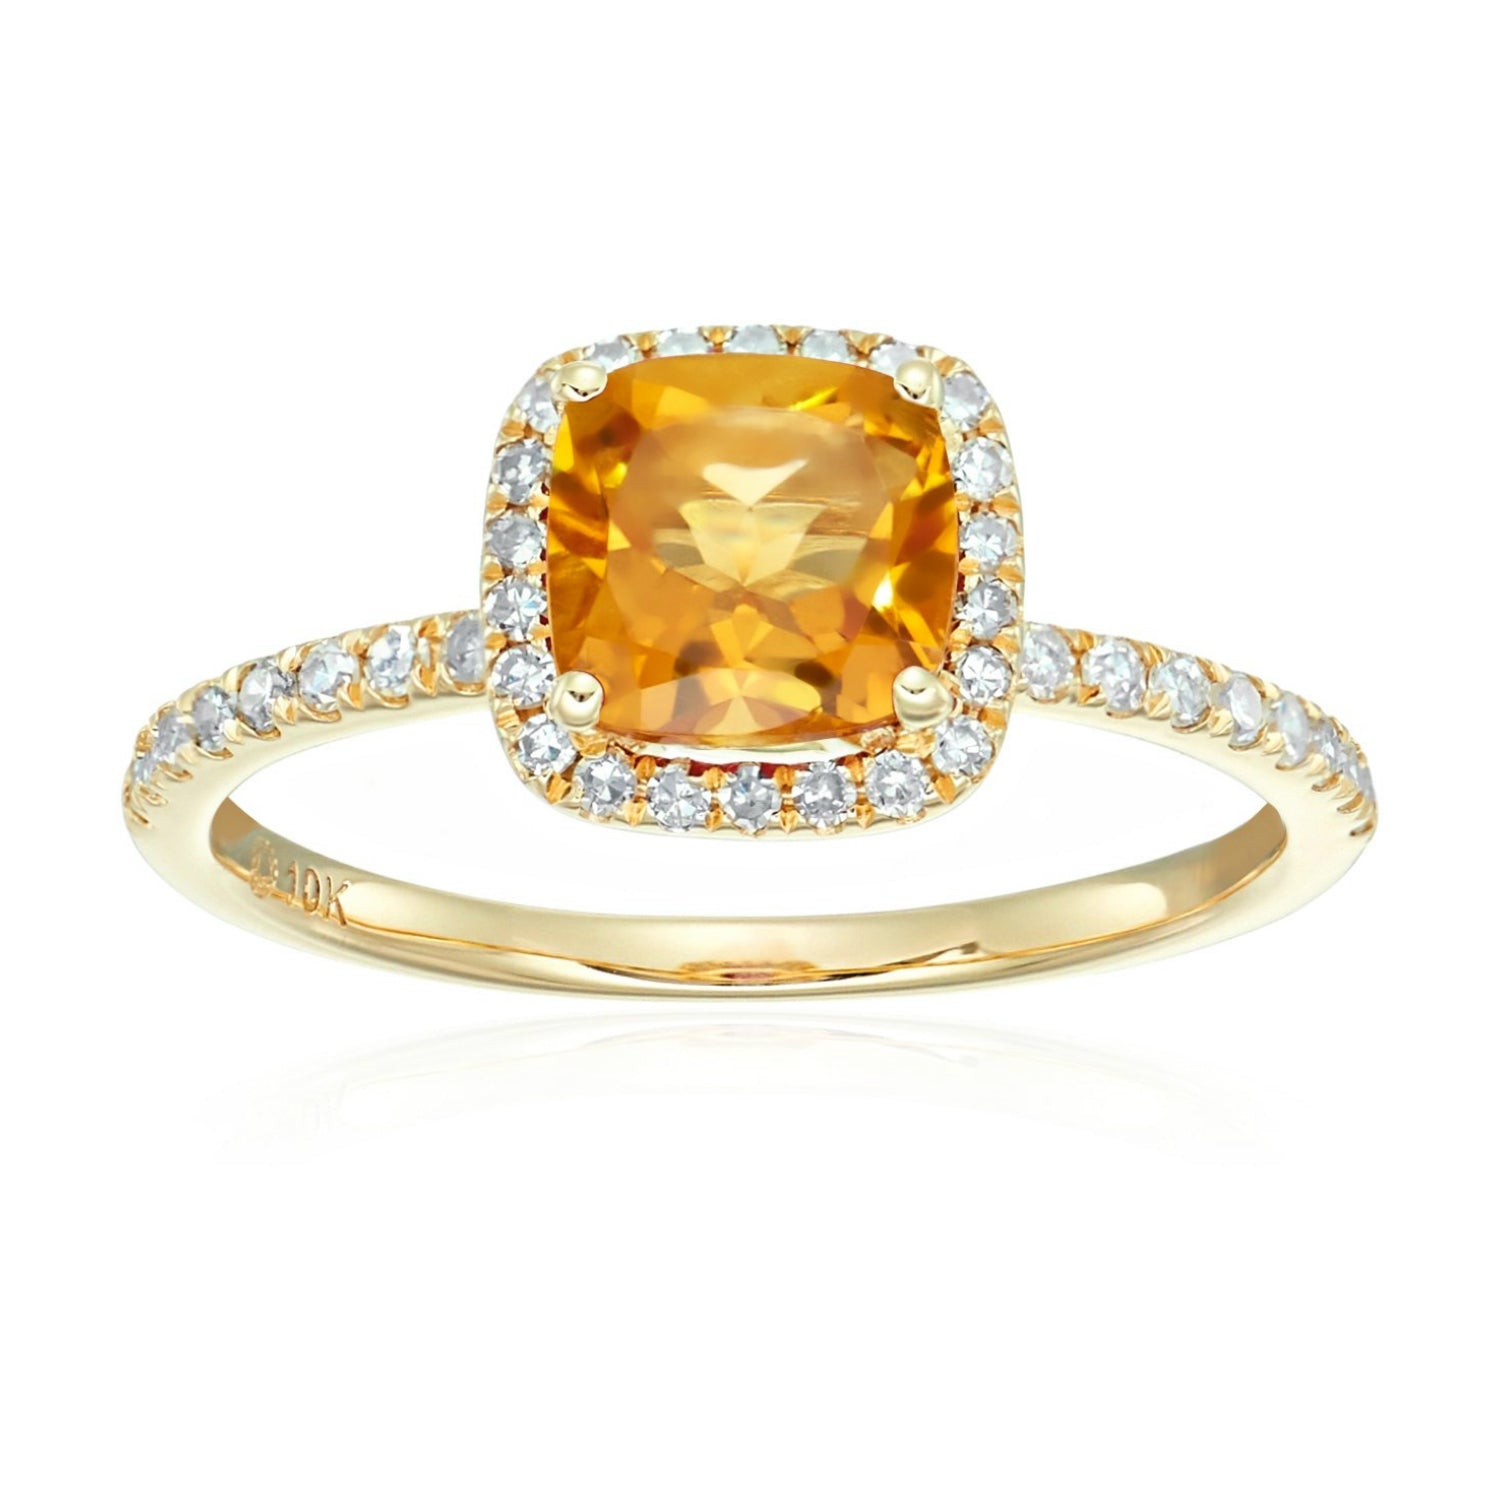 10k Yellow Gold Citrine and Diamond Cushion Halo Engagement Ring (1/4cttw, H-I Color, I1-I2 Clarity), - pinctore